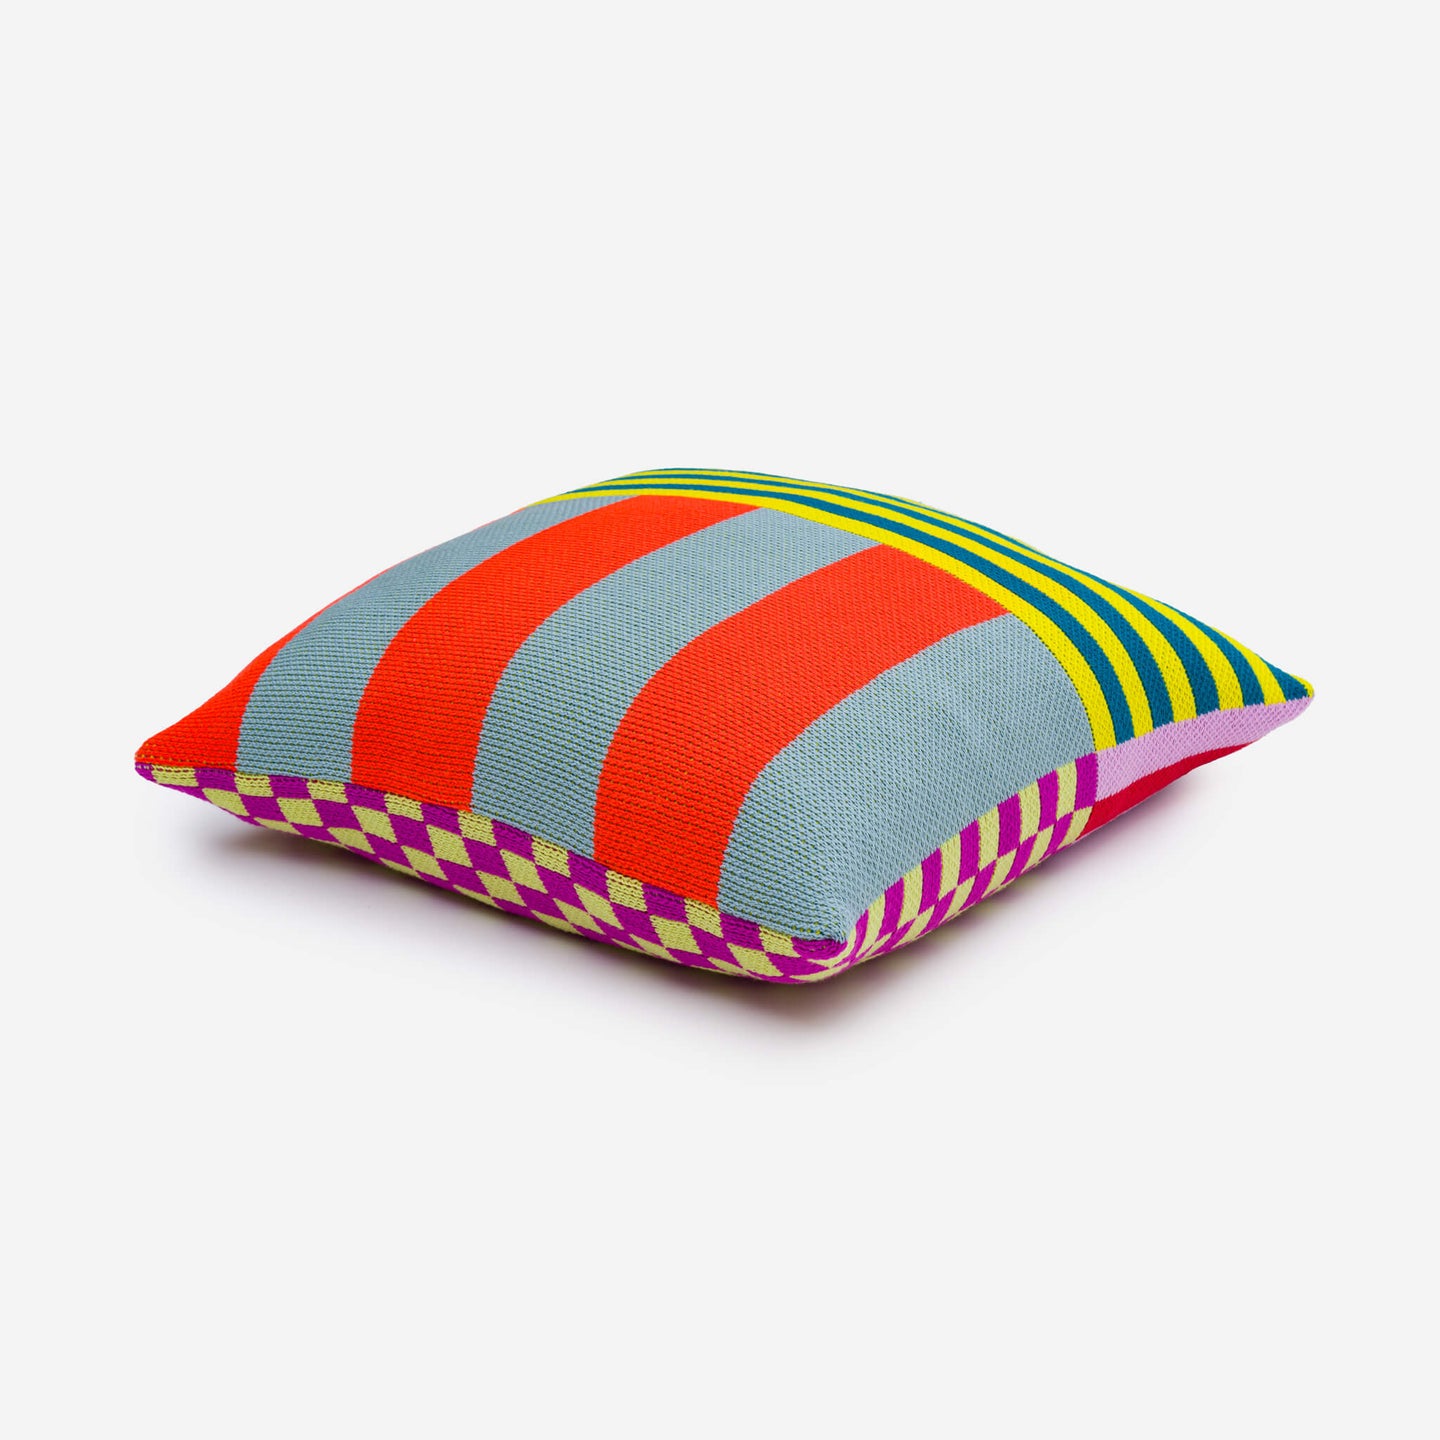 Pattern Patch Knit Pillow Cover Bold Pattern Colorful Mix Match Reversible